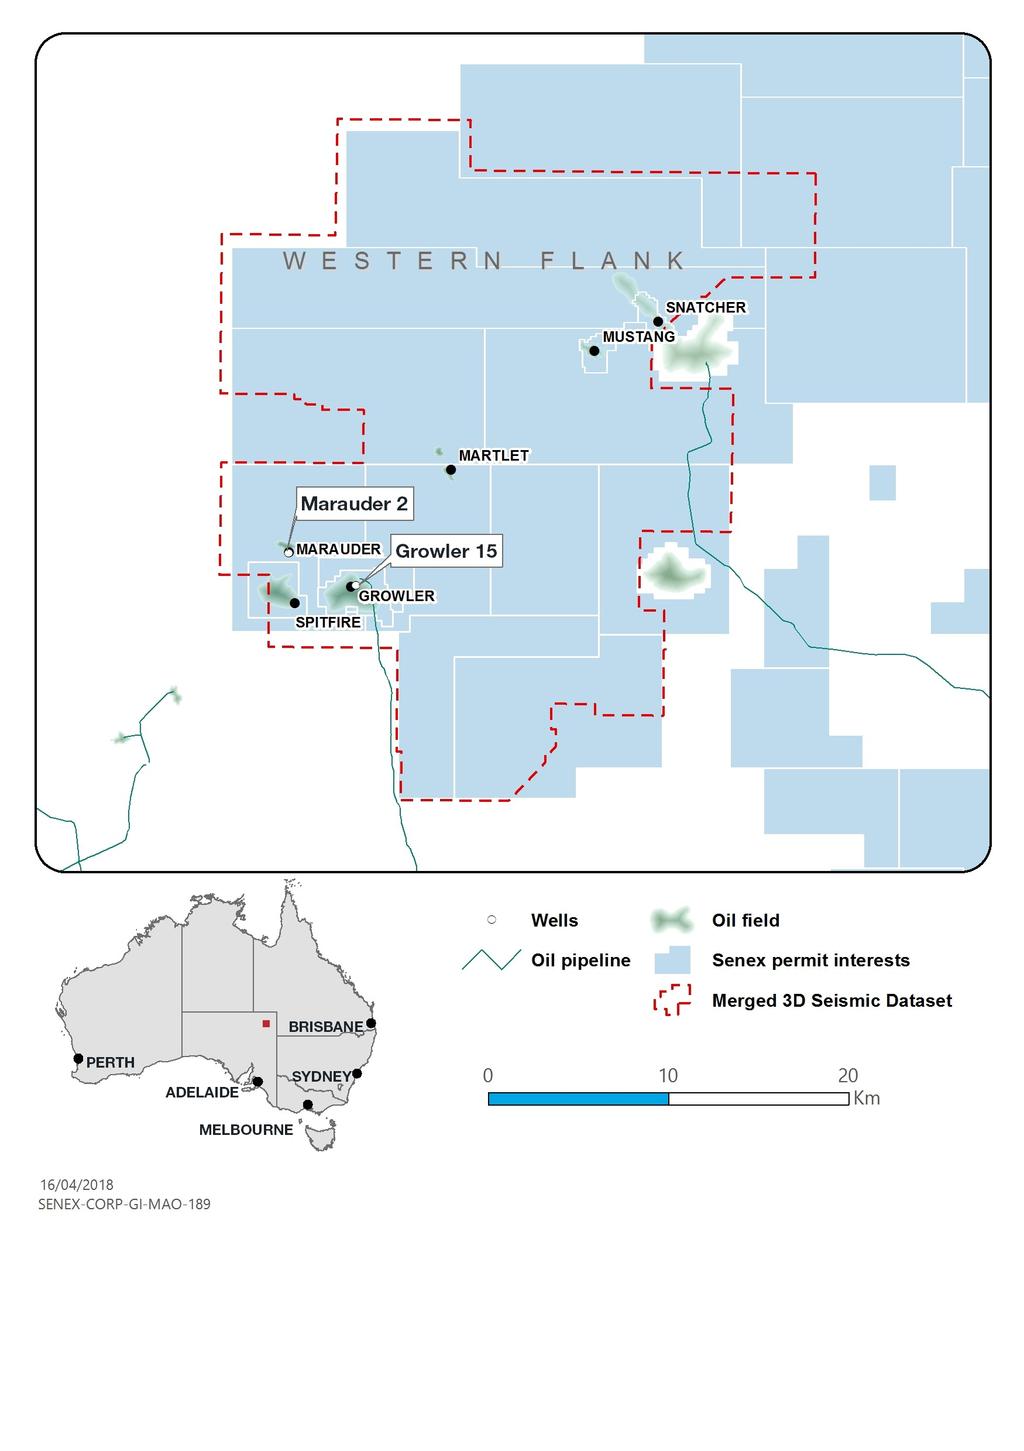 ly Report OIL BUSINESS COOPER BASIN Exploration and Development Growler-15 well During the quarter Senex successfully drilled, completed and brought online the first horizontal well on the Growler